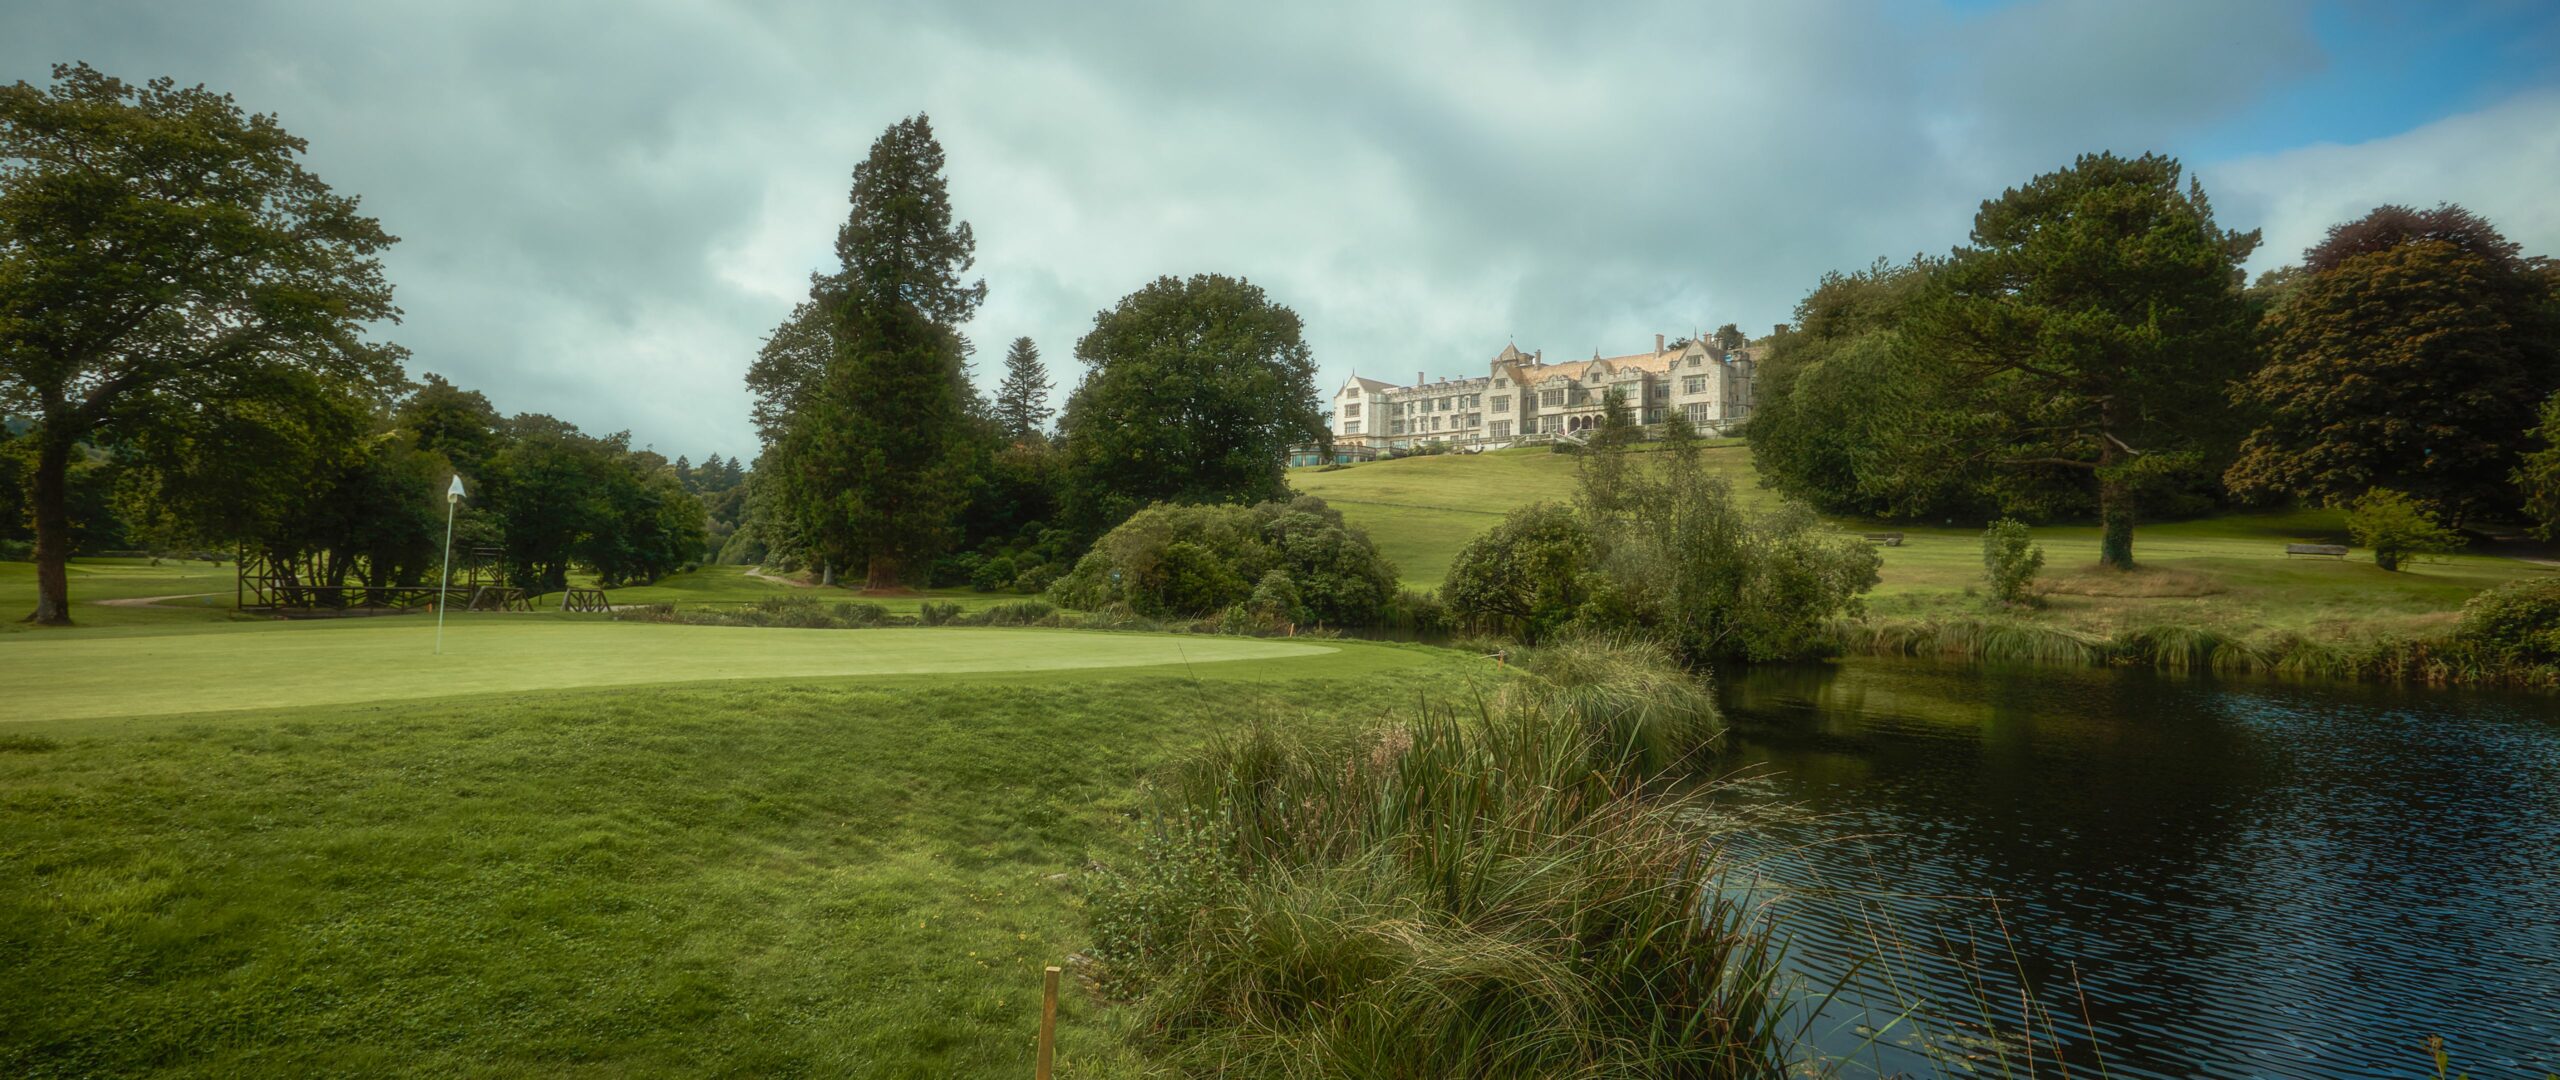 Bovey Castle golf course lake view 